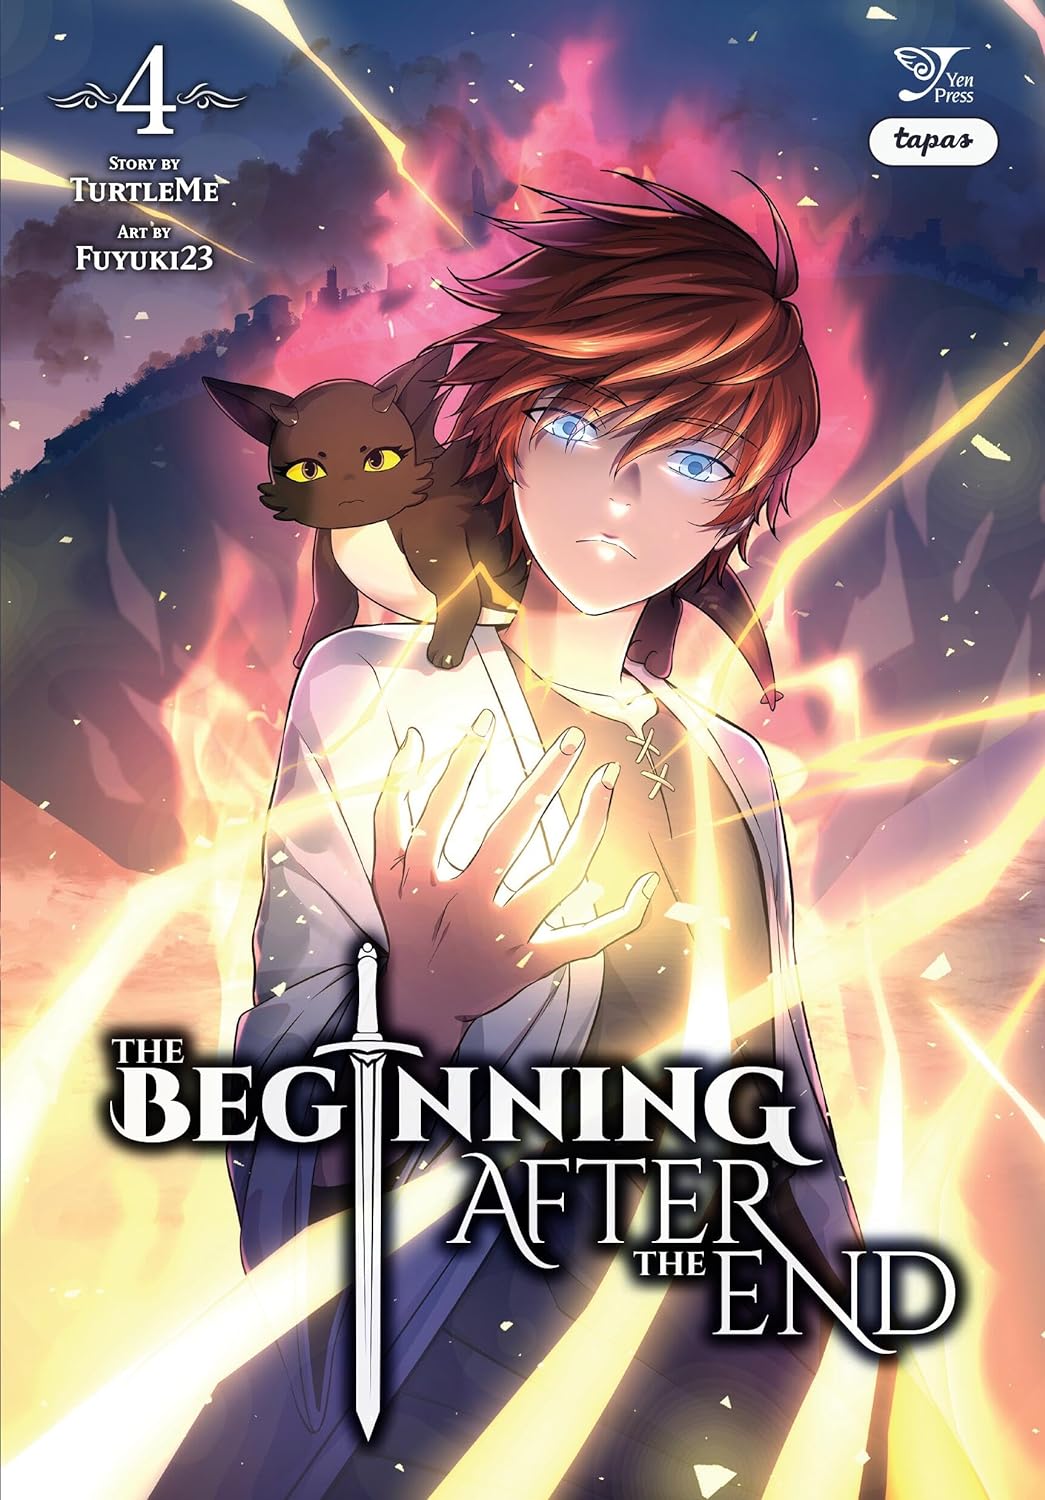 The Beginning After the End (Comic) Vol. 04